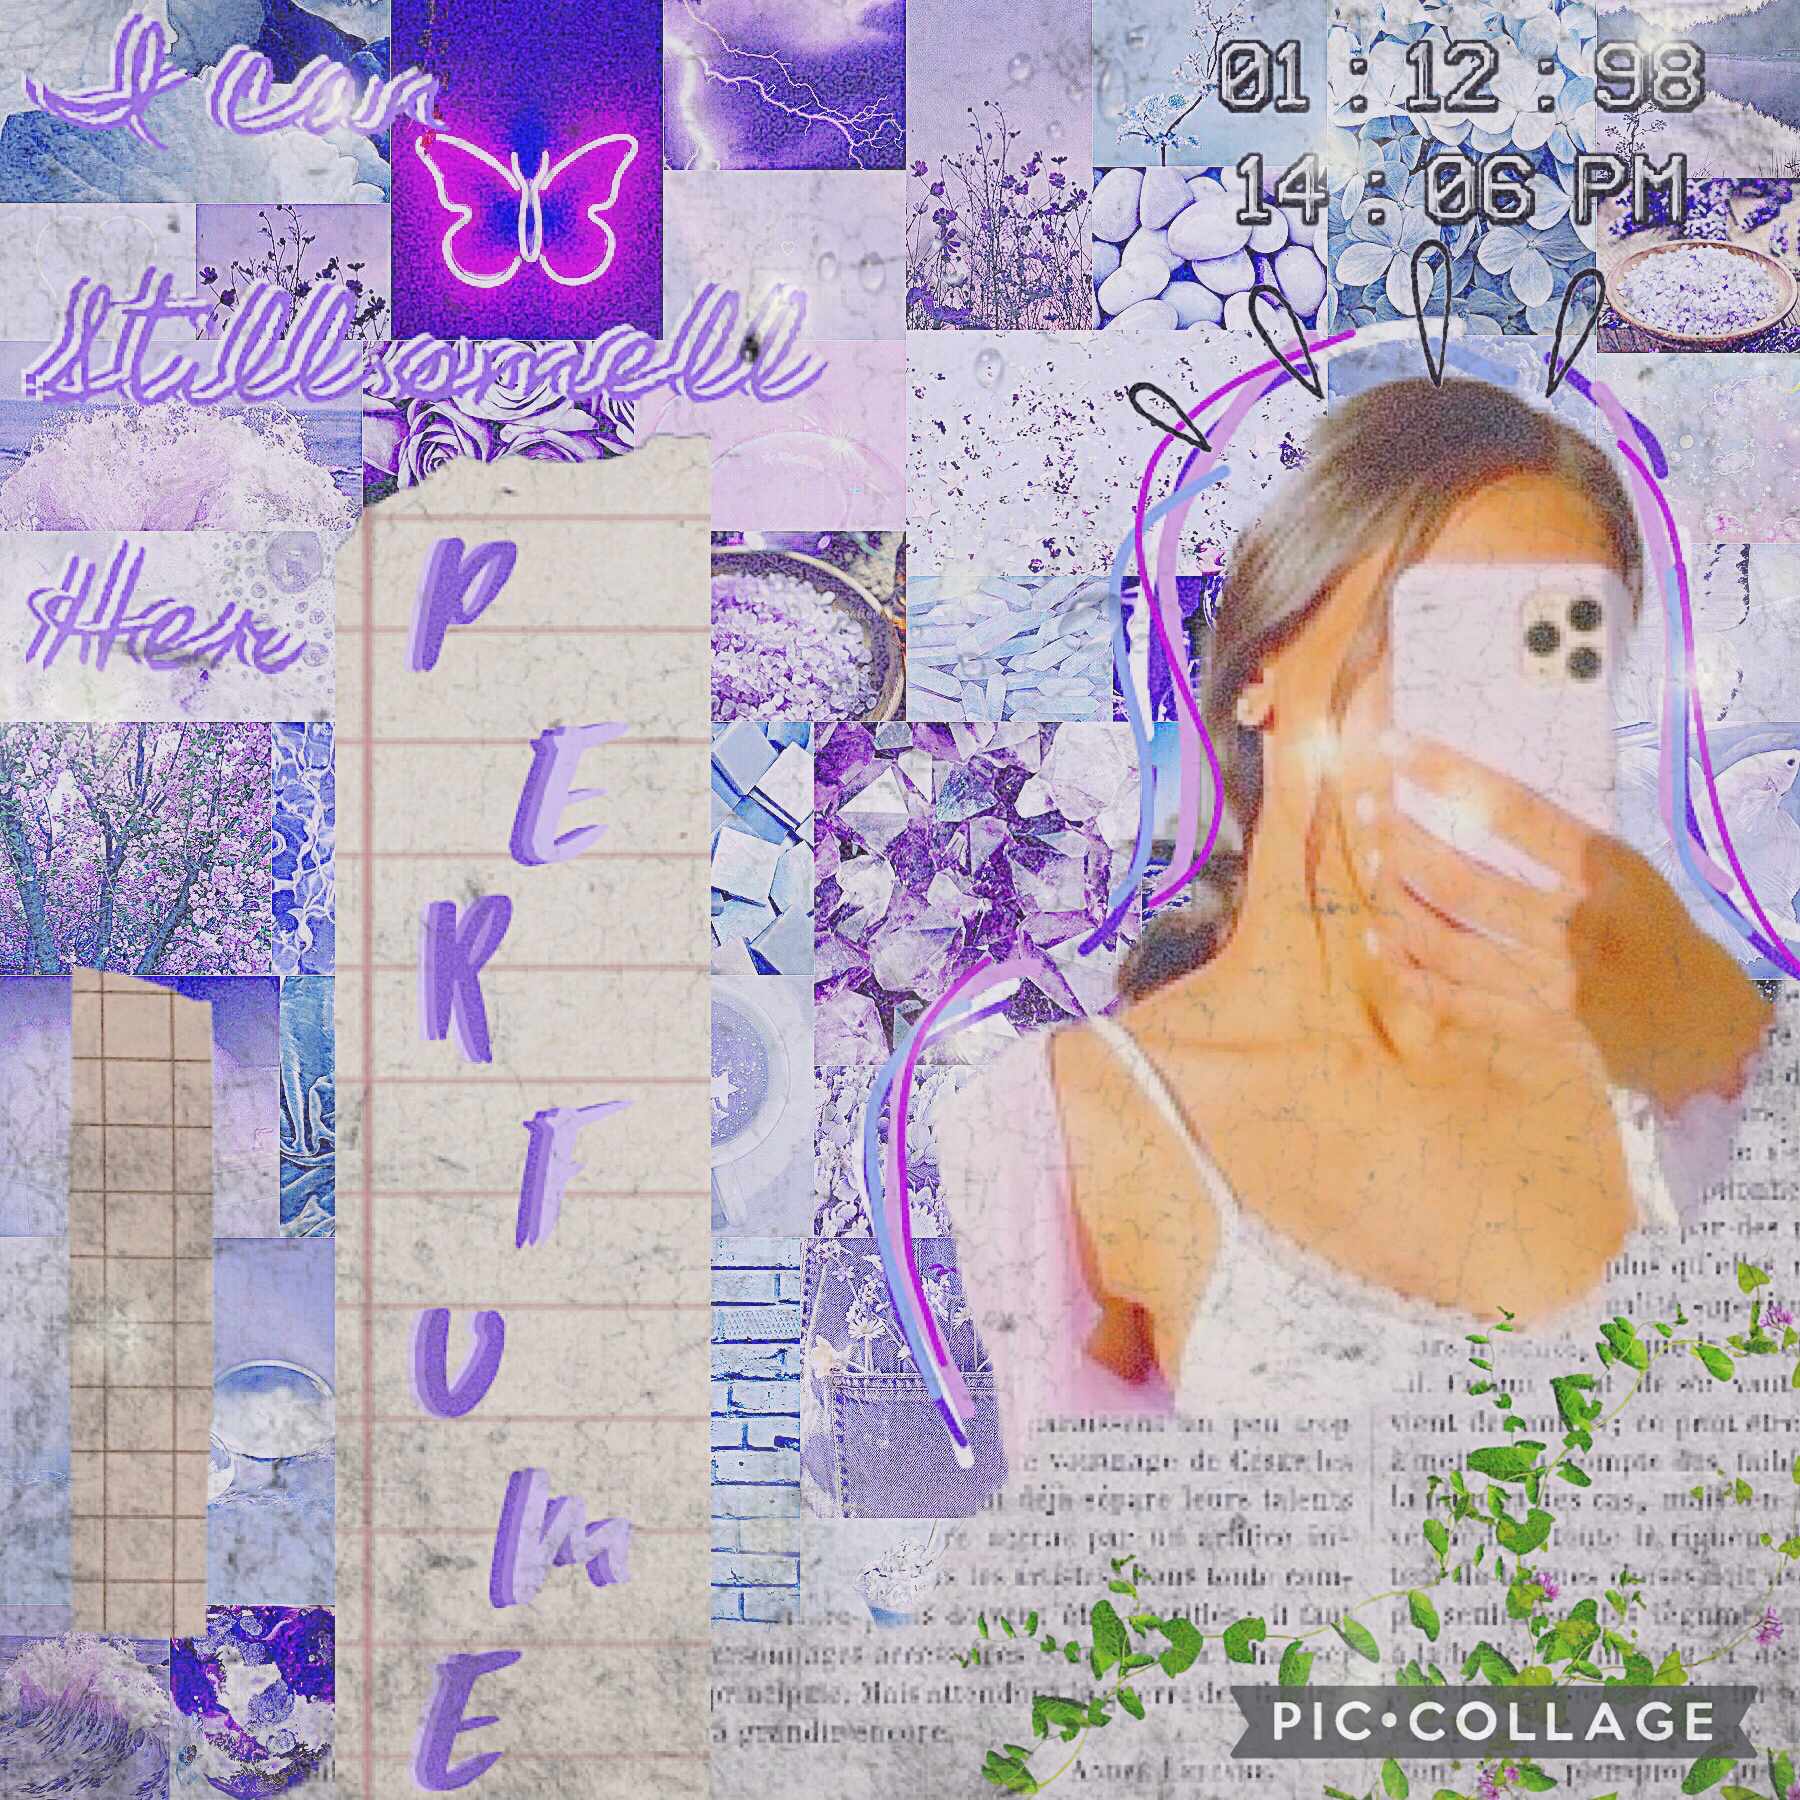 💜11.1.21💜

Trying to get as many collages out as possible while I have the free time!

I’m slowly getting back into practice after being gone so long……